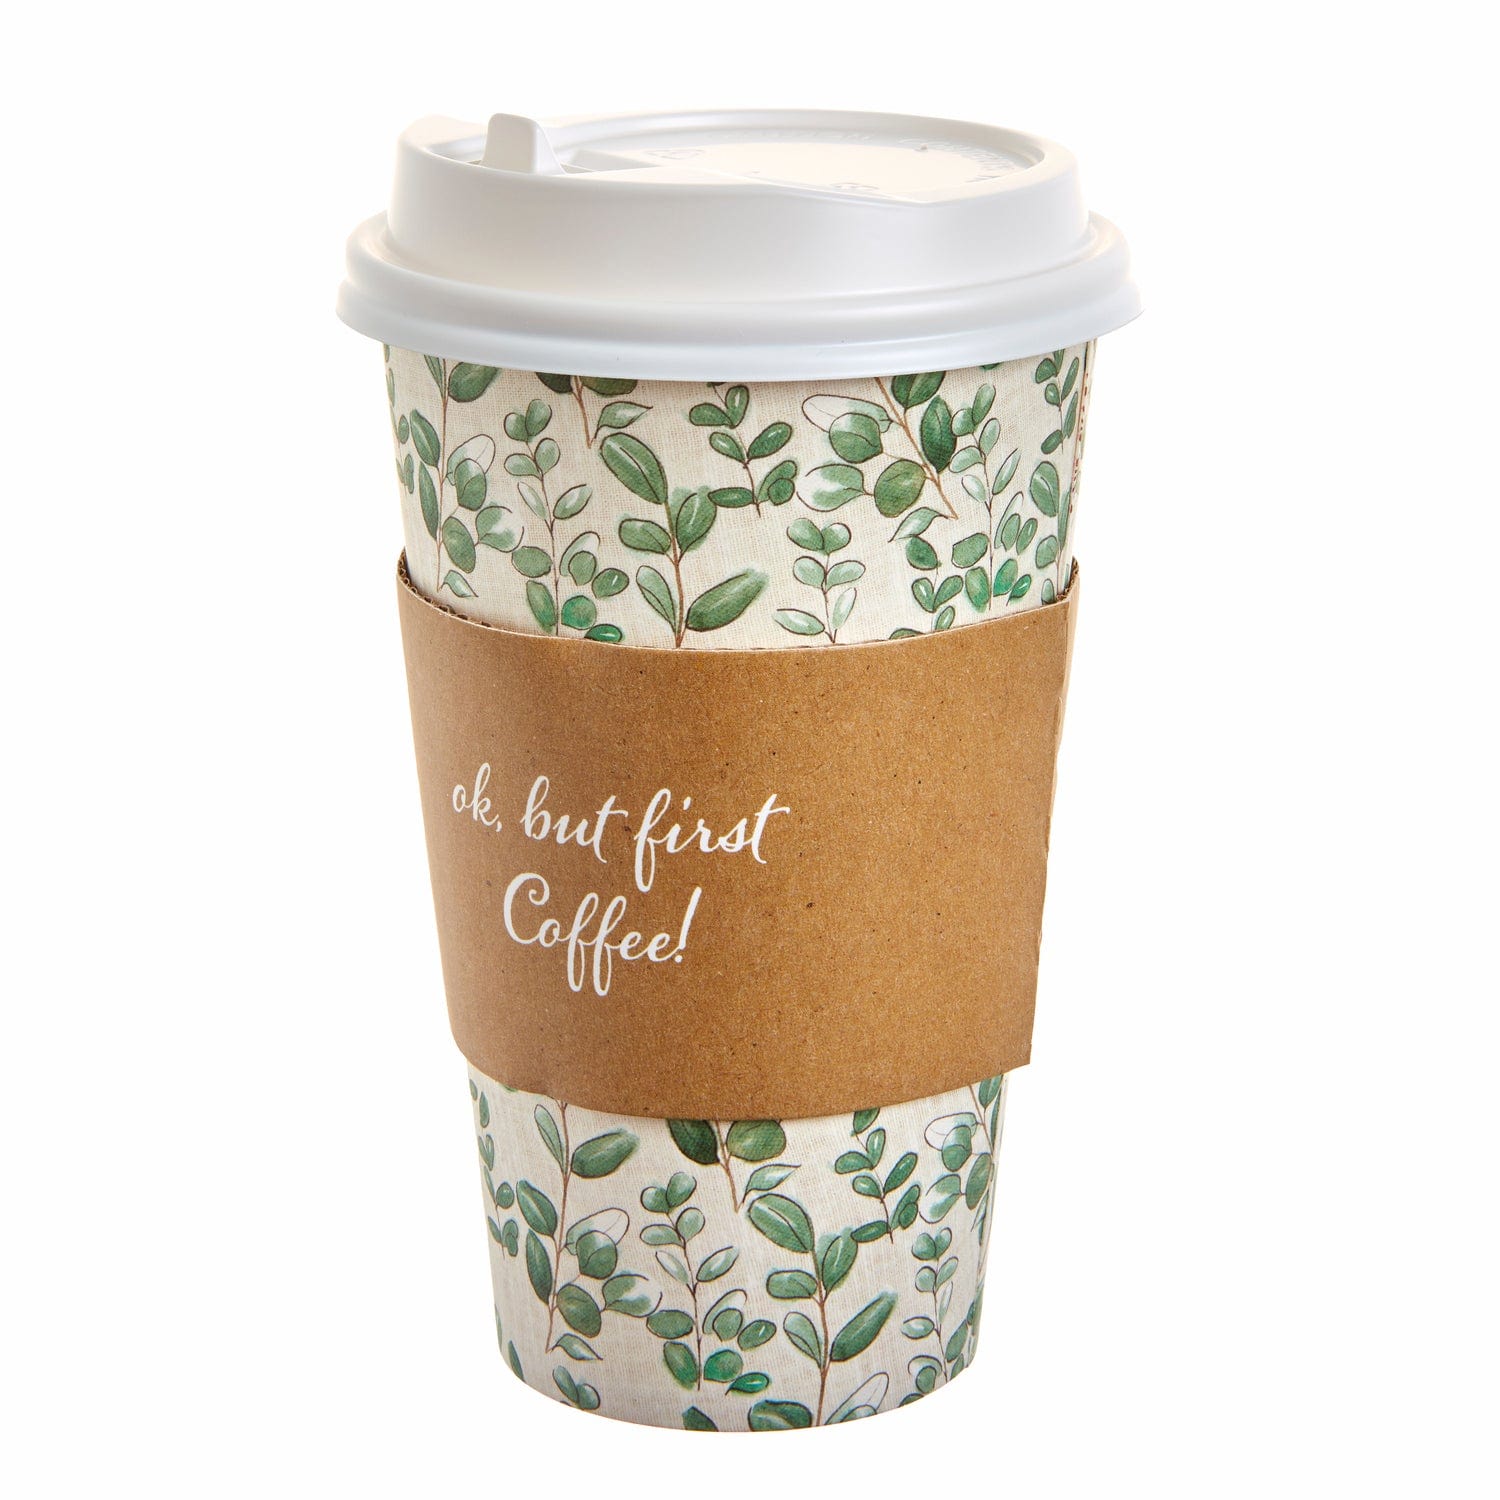 16 oz. Fall Harvest Design Disposable Paper Coffee Cups with Lids